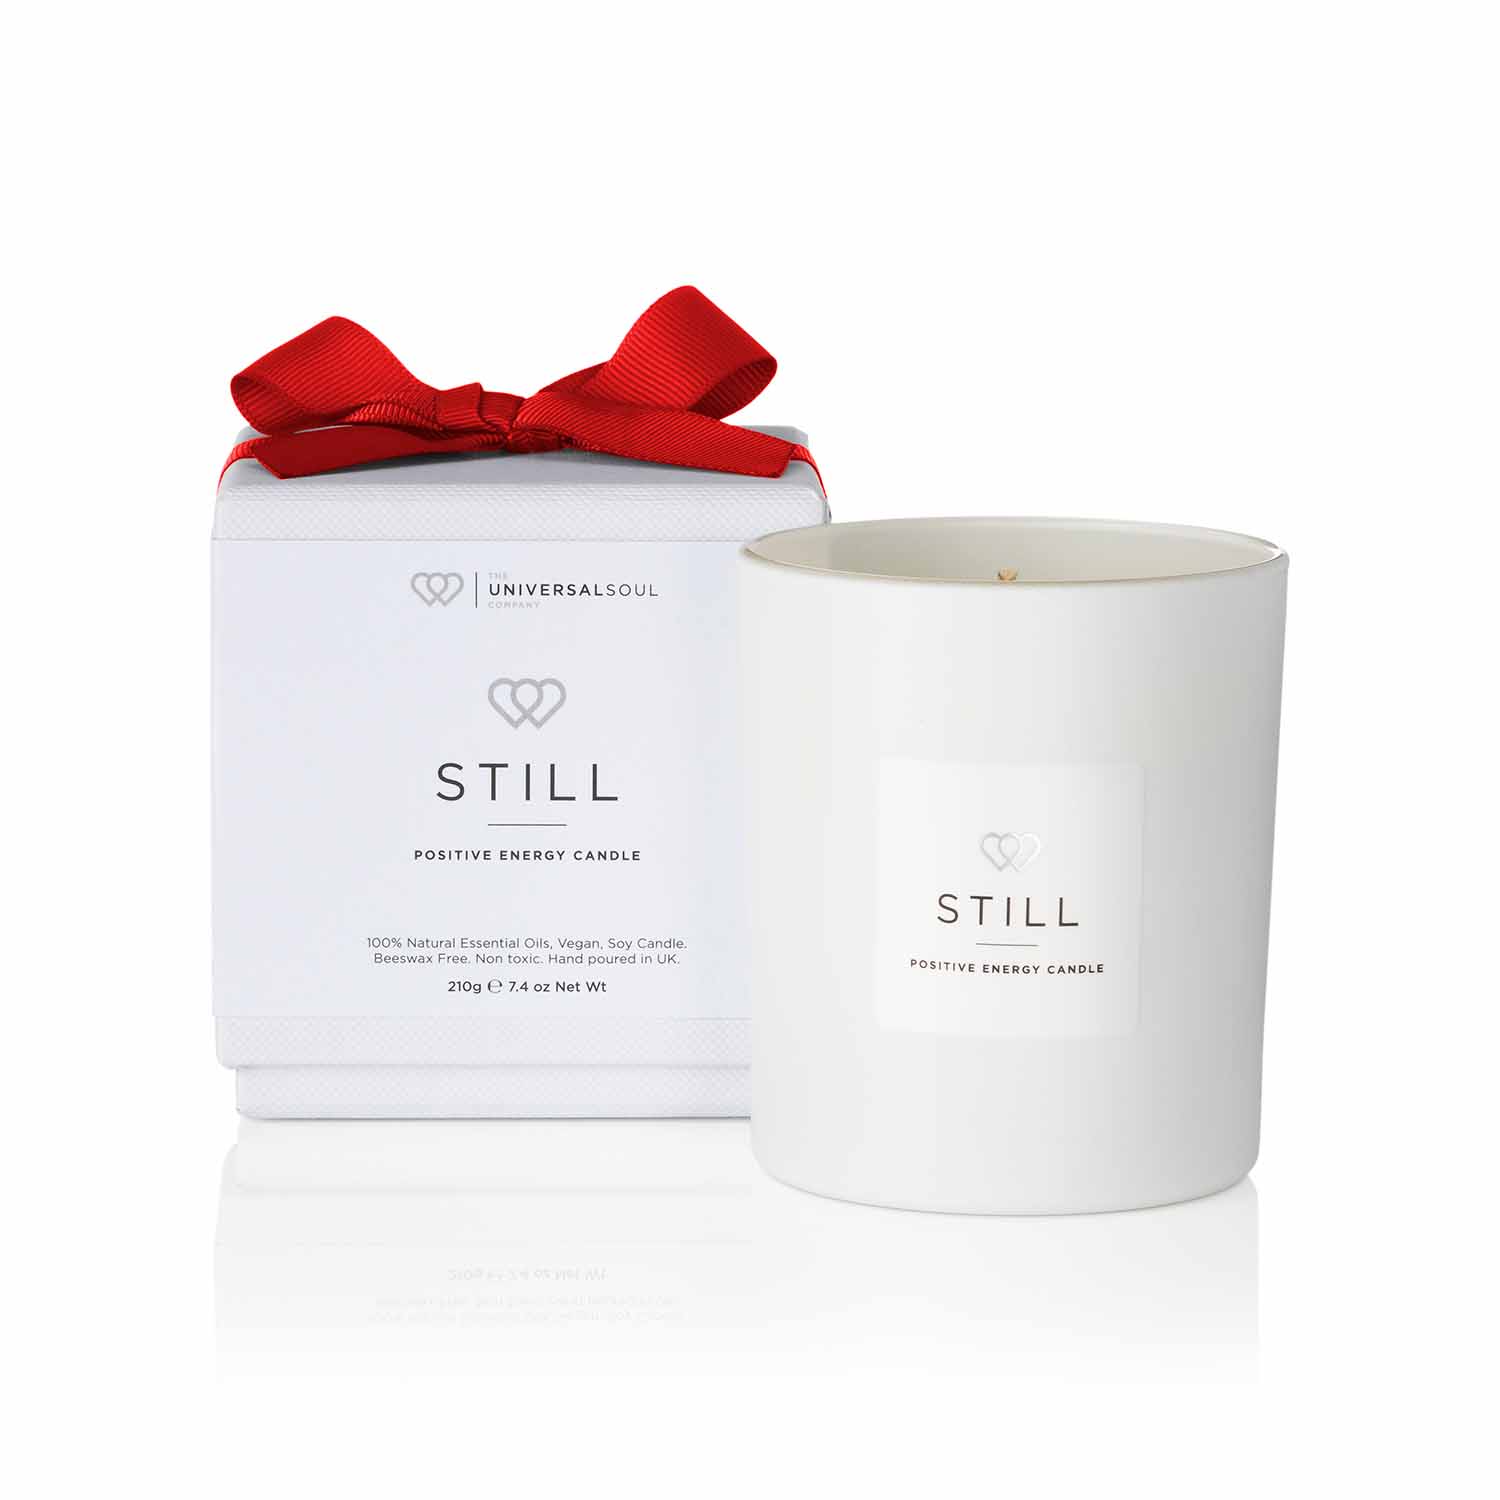 Valentines:Wedding 30cl Candle matt white with packaging and red bow - The Universal Soul Company 1500px - The Universal Soul Company